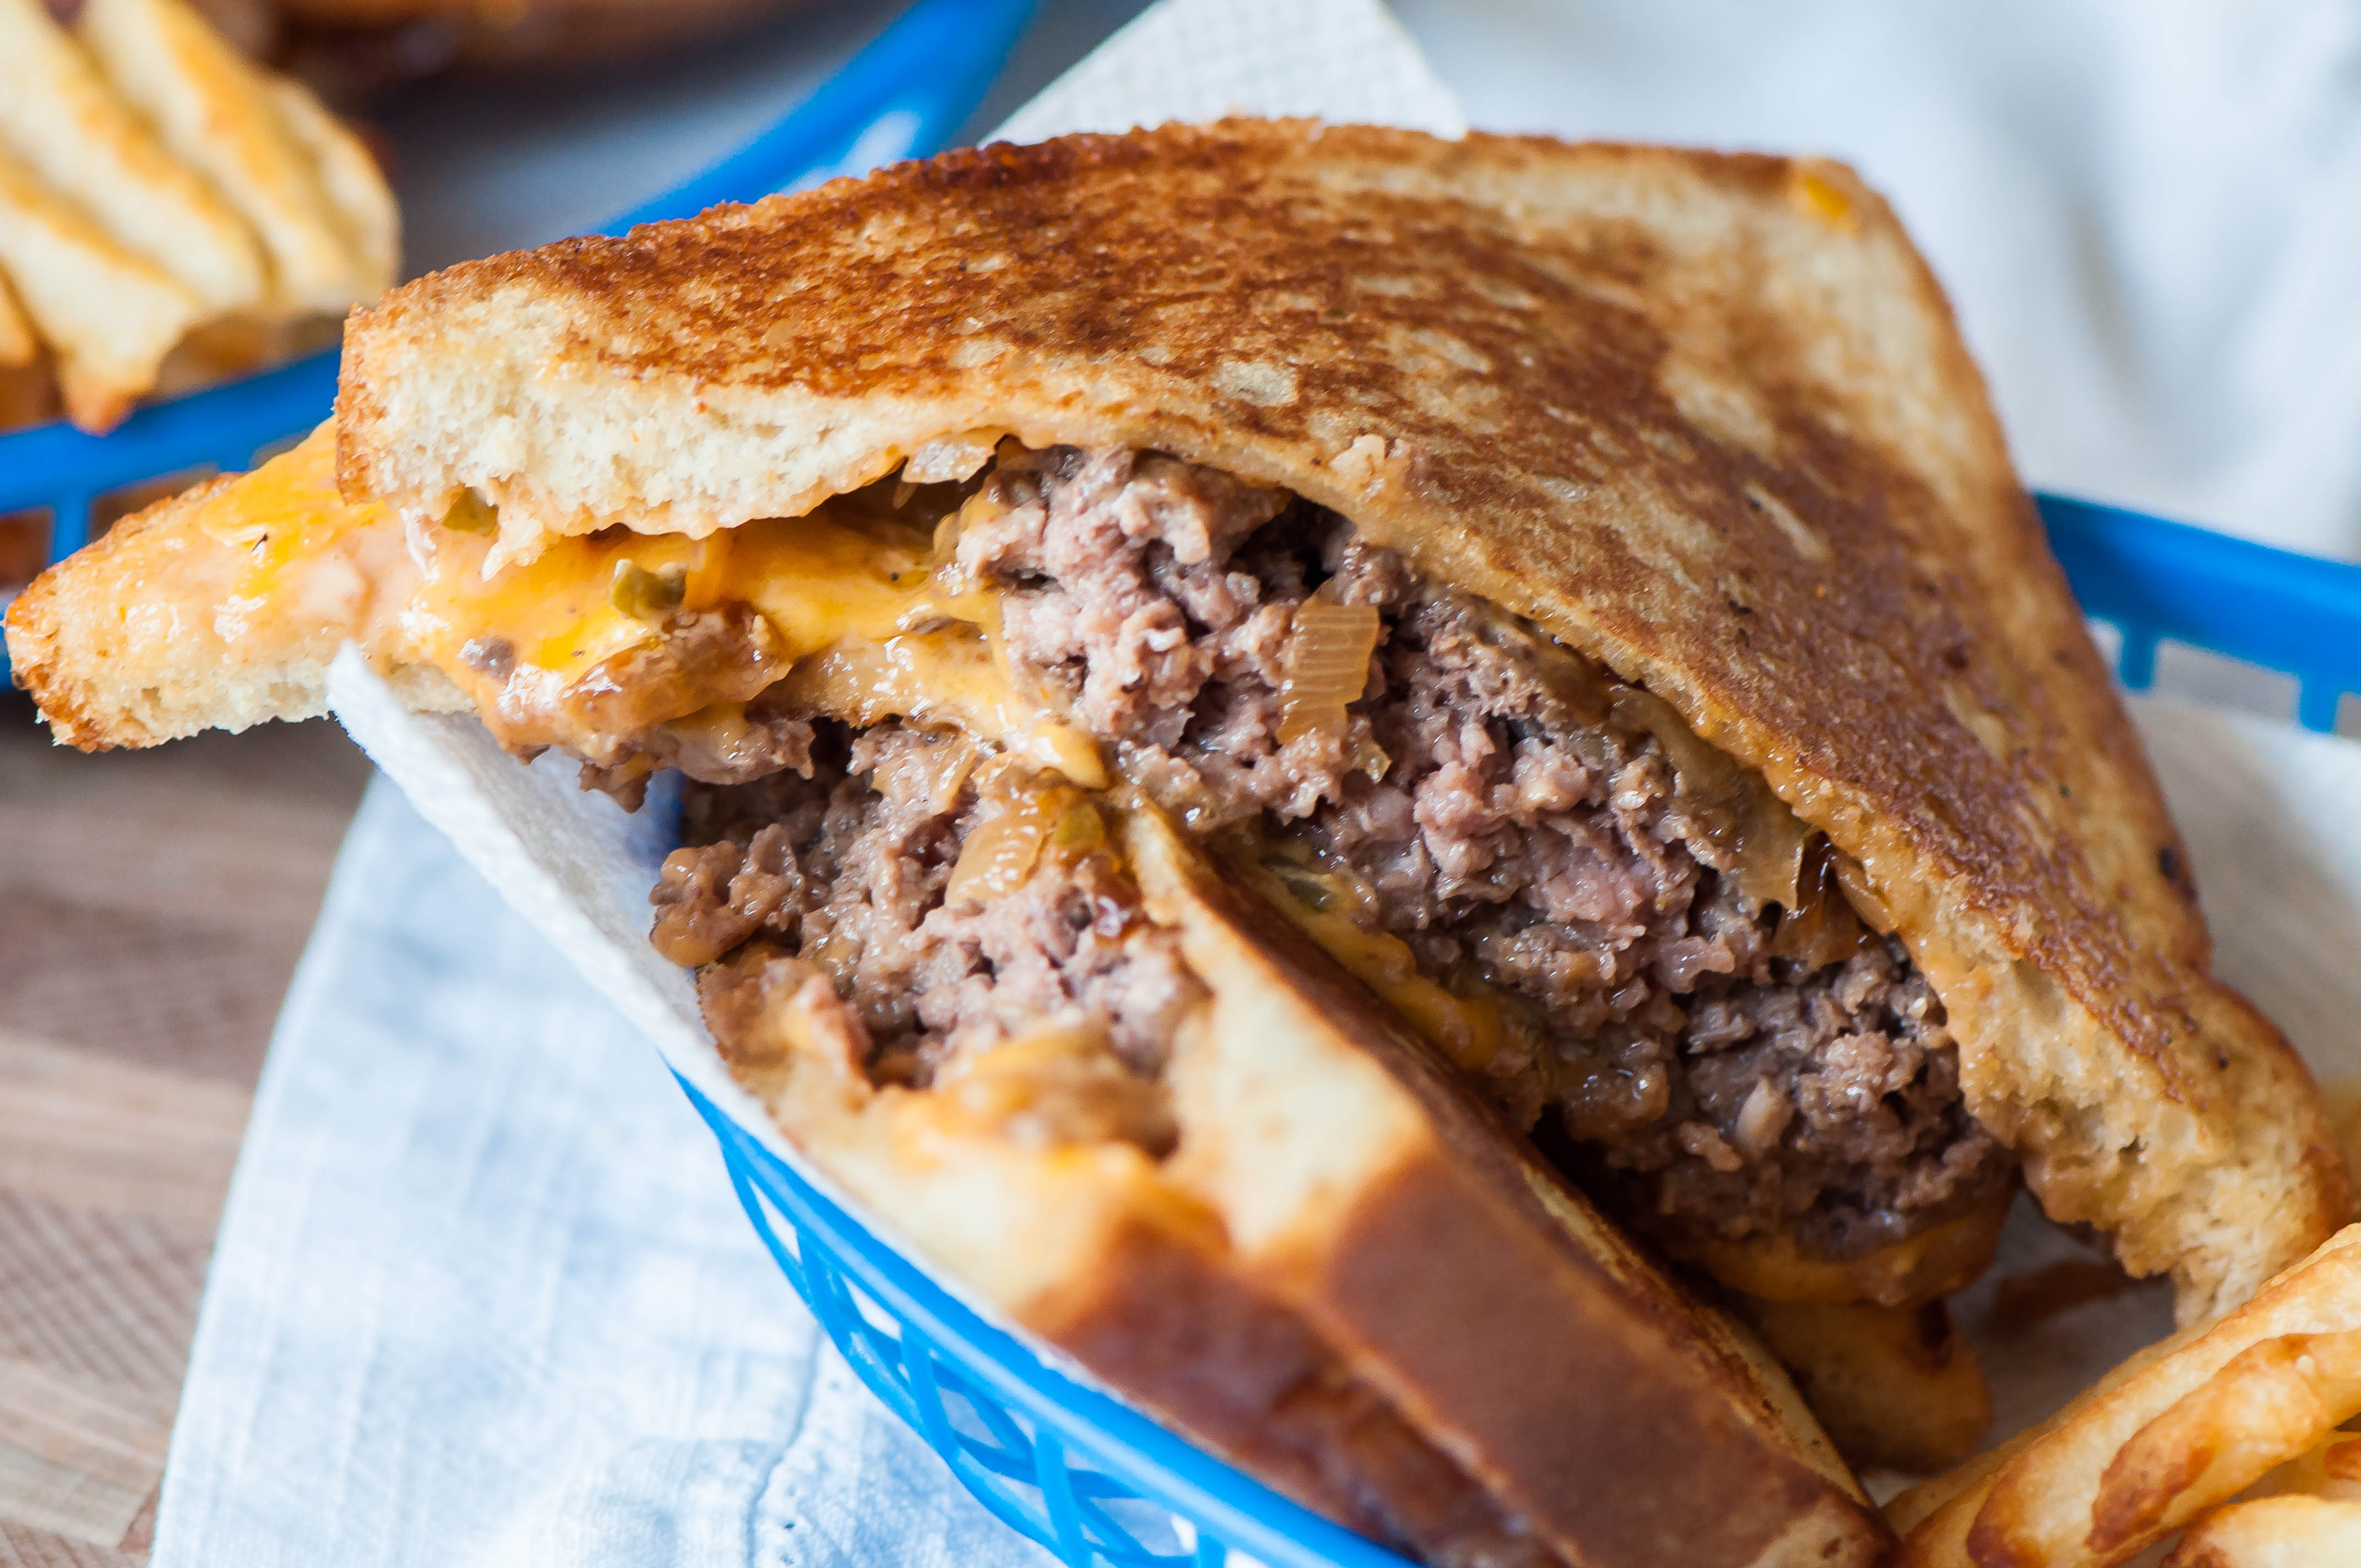 This classic patty melt is the perfect way to celebrate the dad's in your life. Loaded with caramelized onions, cheese and burger sauce.